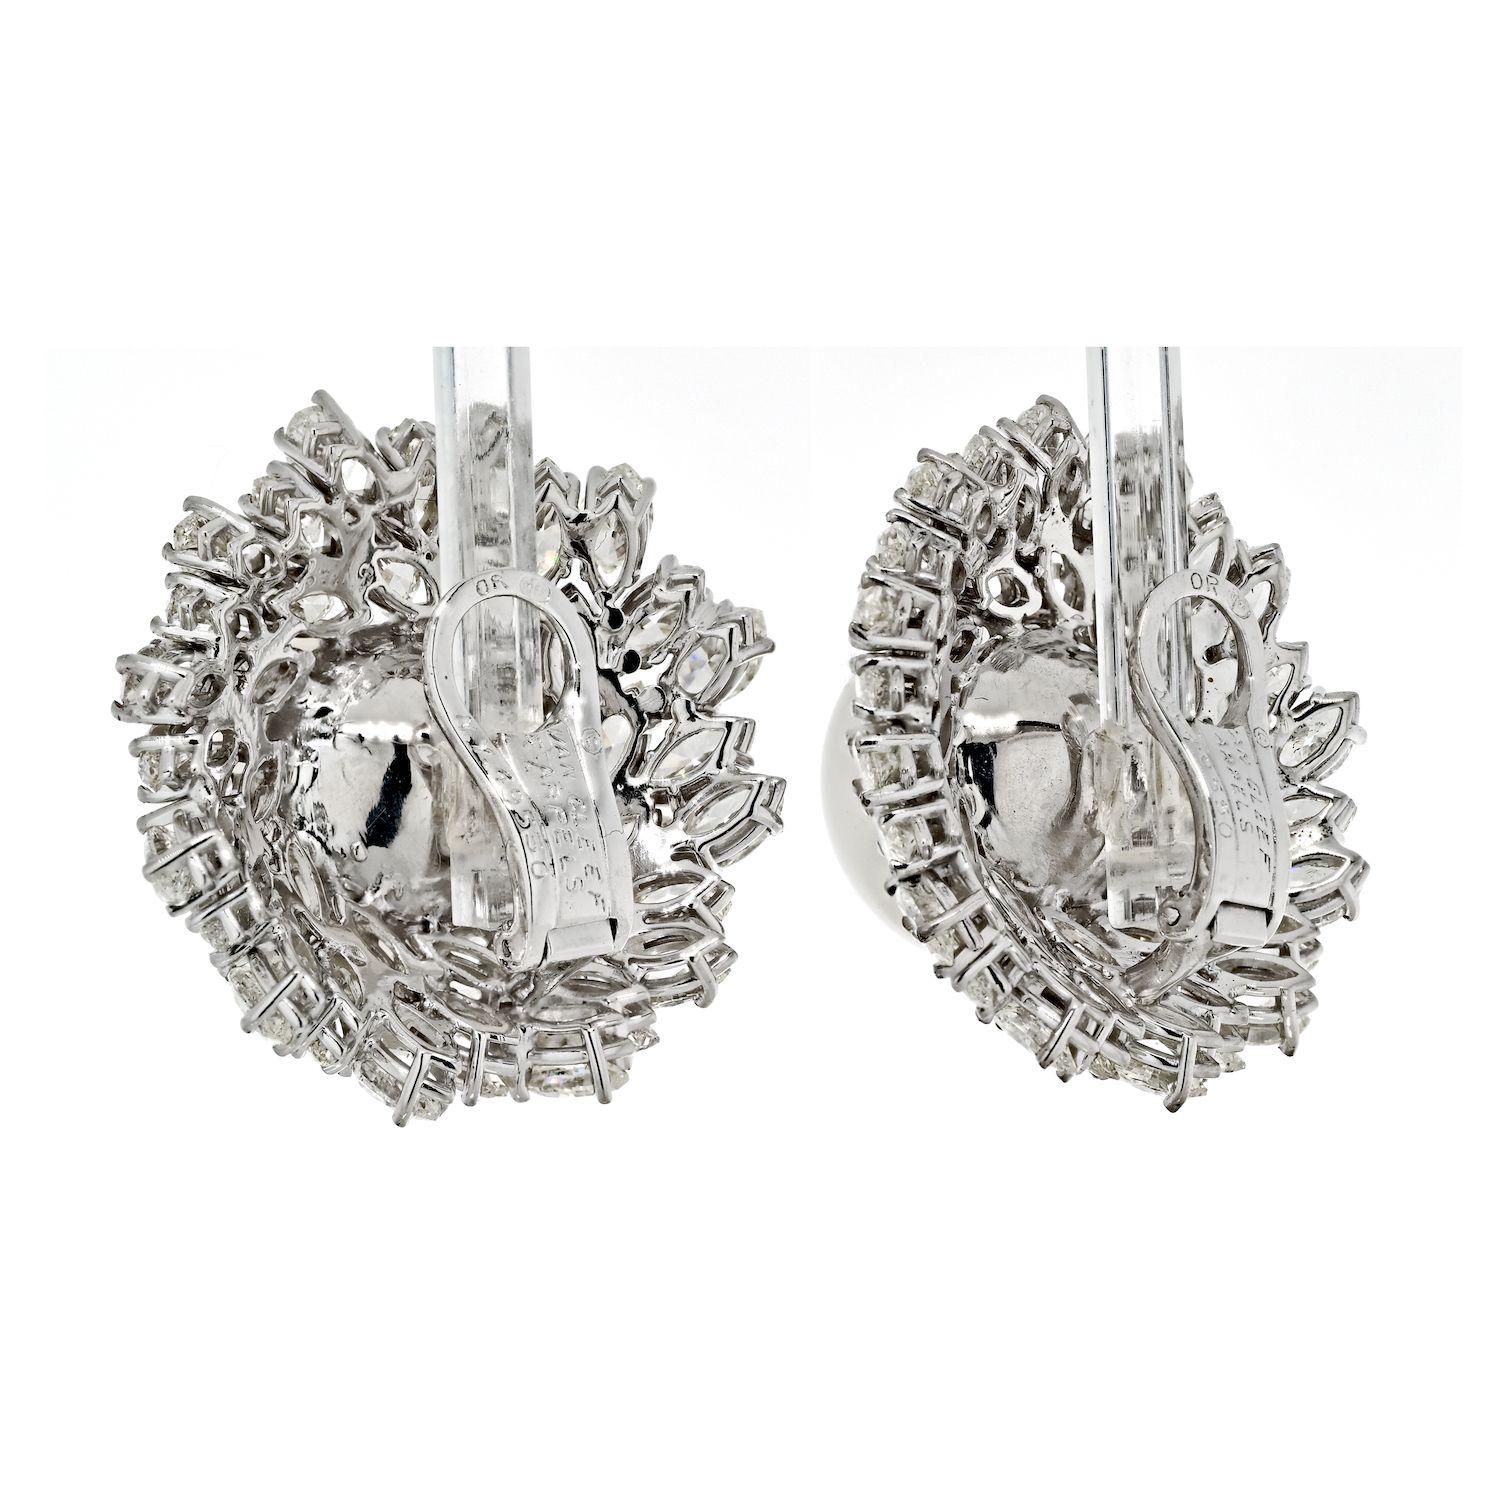 Behold the epitome of elegance and luxury with the Van Cleef & Arpels Estate Diamond and Pearl Bombe Earrings, a breathtaking testament to the artistry of fine jewelry. Crafted in exquisite 18k white gold, these earrings exude an aura of timeless